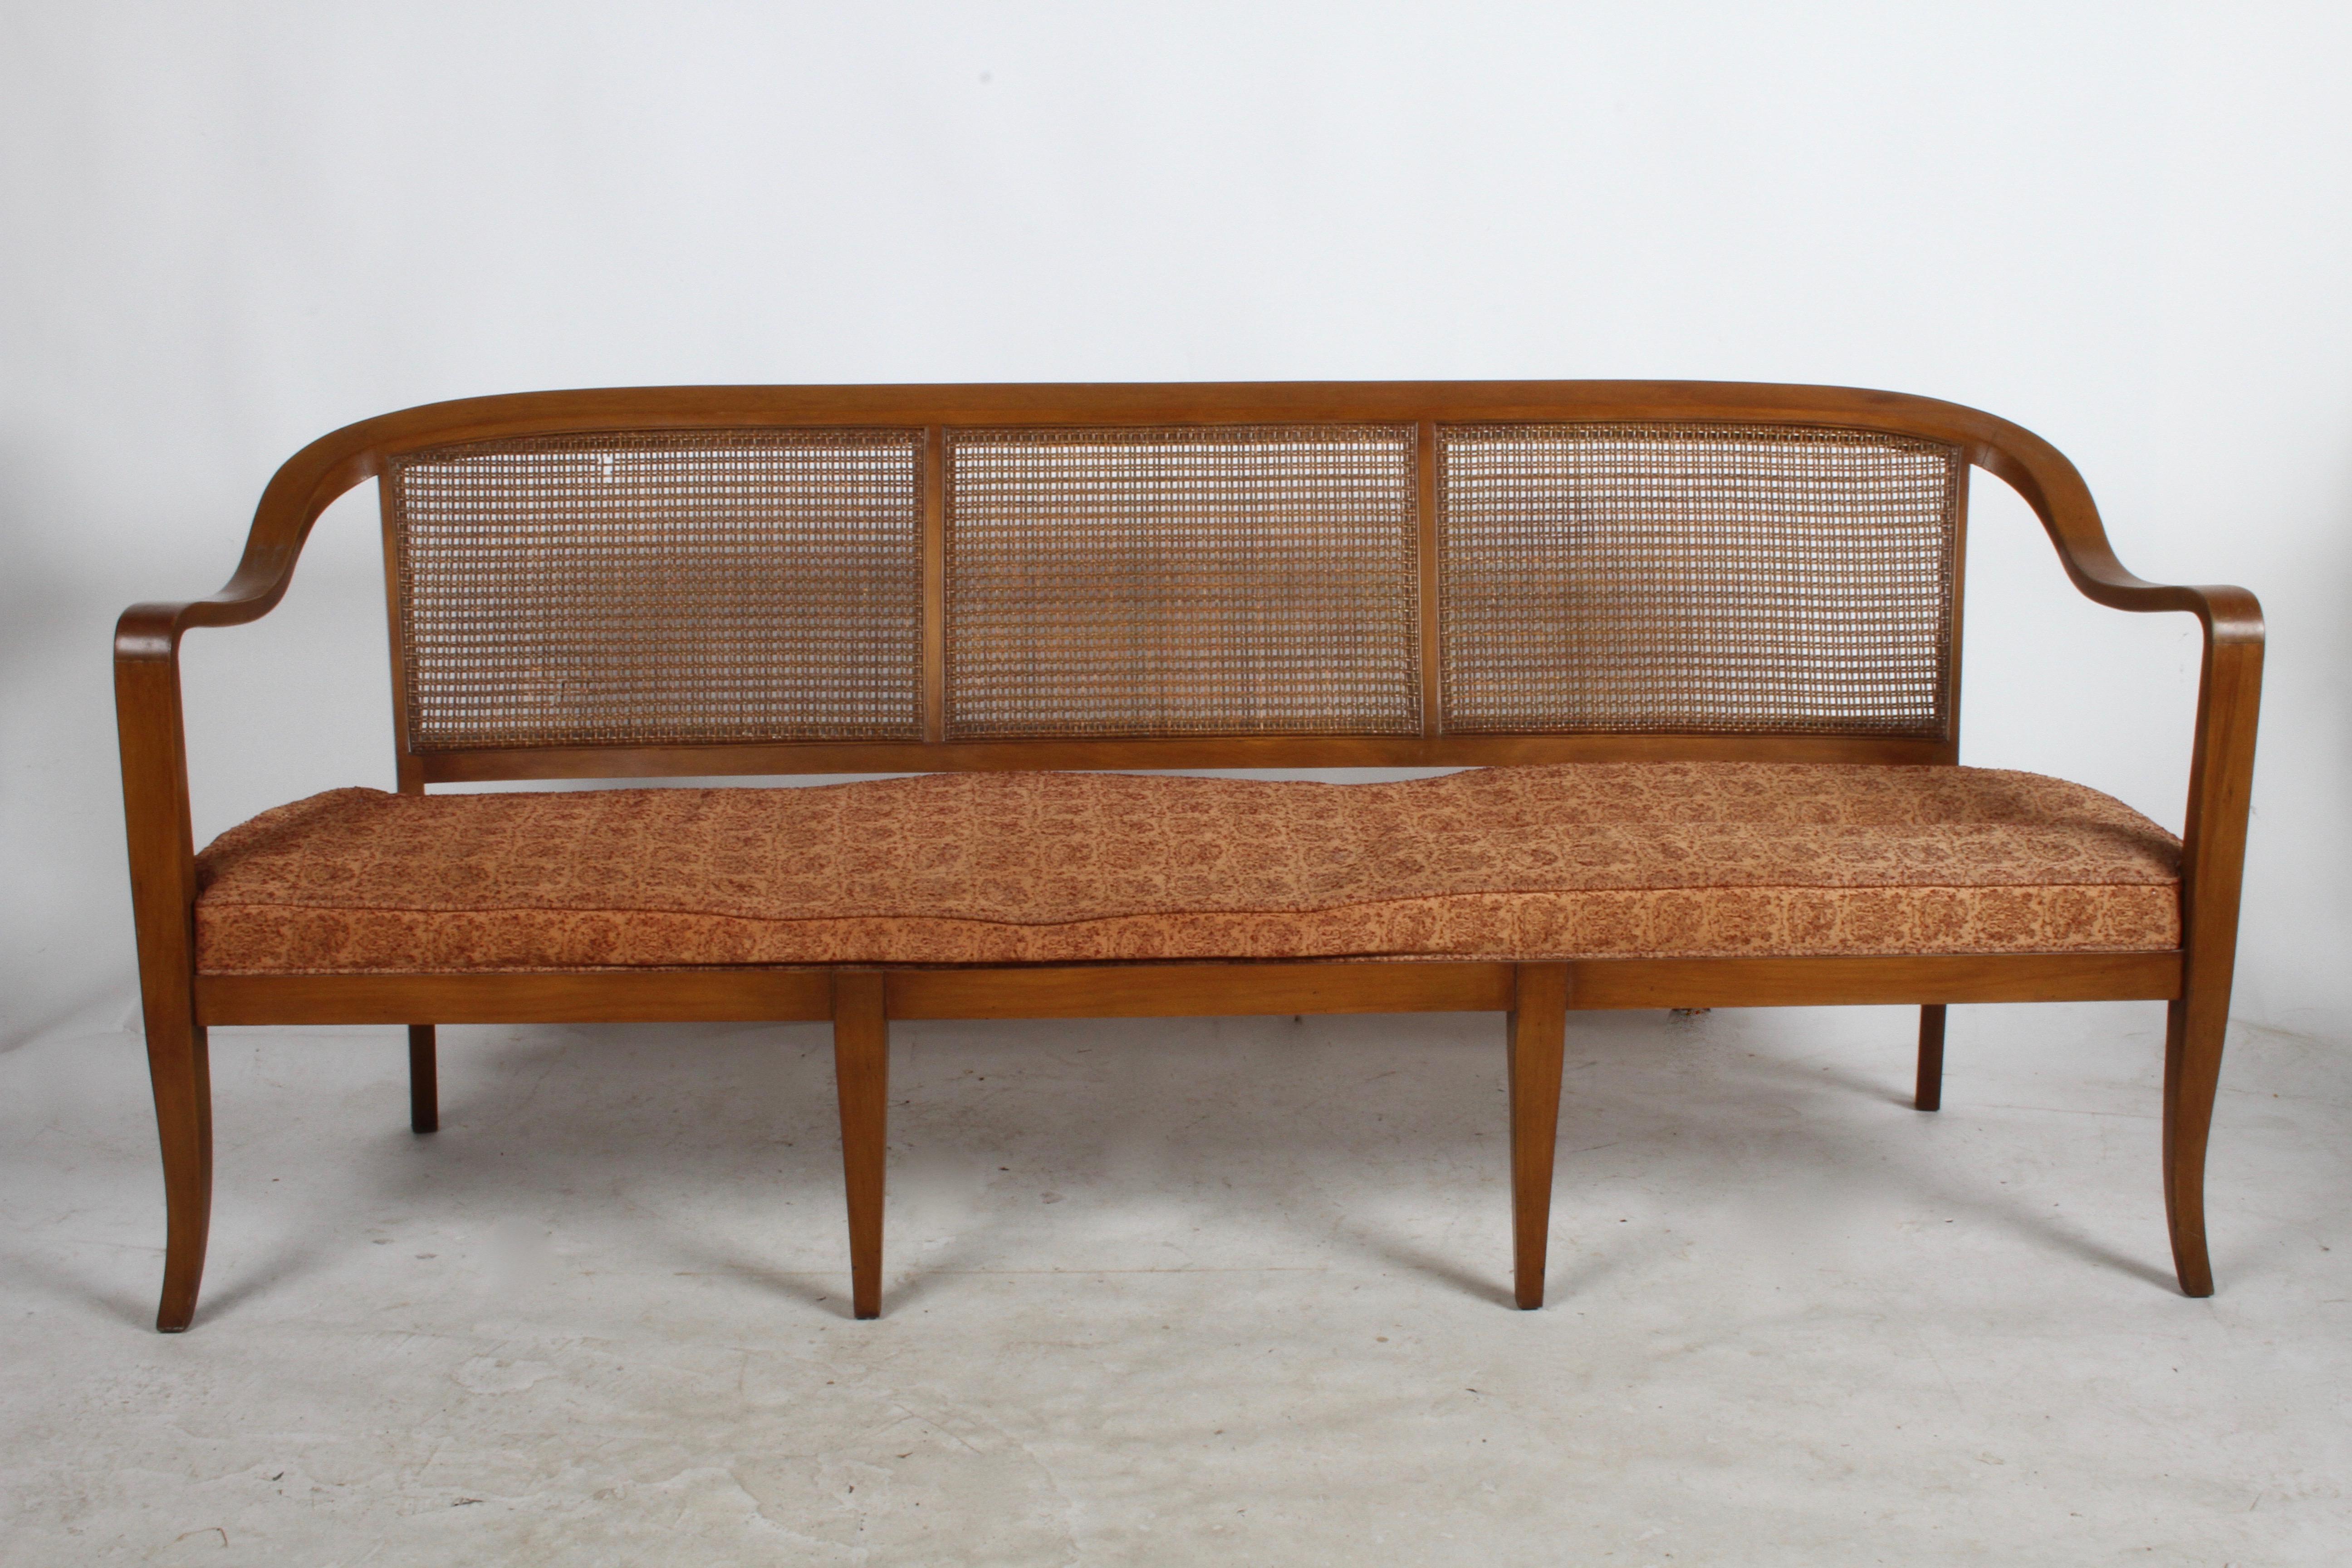 Stained Edward Wormley for Dunbar Style Cane Bentwood Bench or Sofa